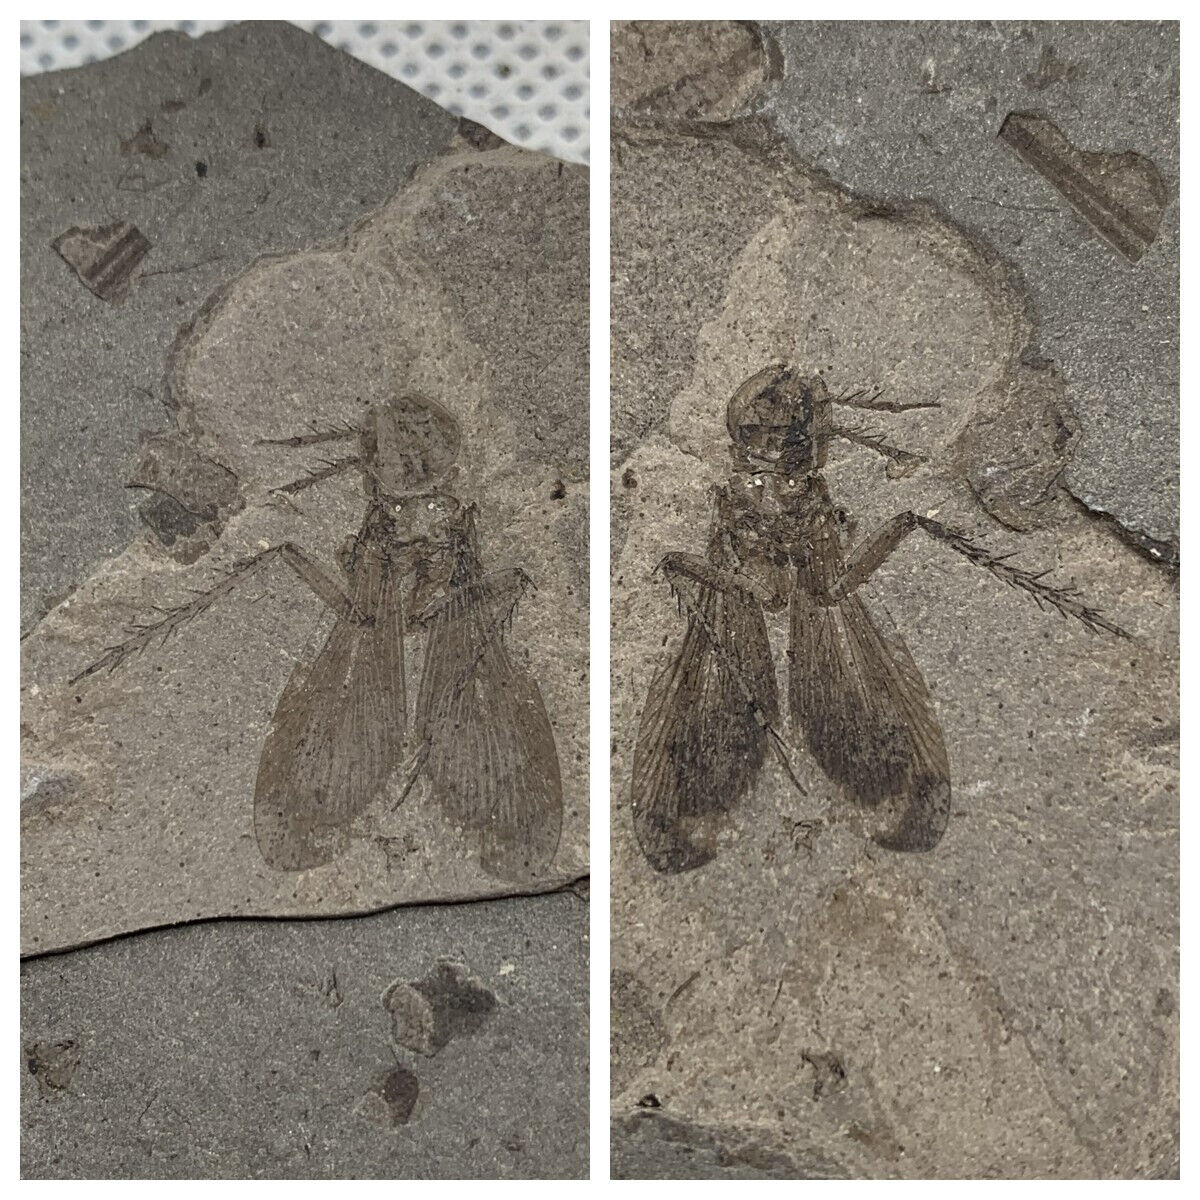 A pair of exquisite insect fossils from the Jurassic Daohugou period